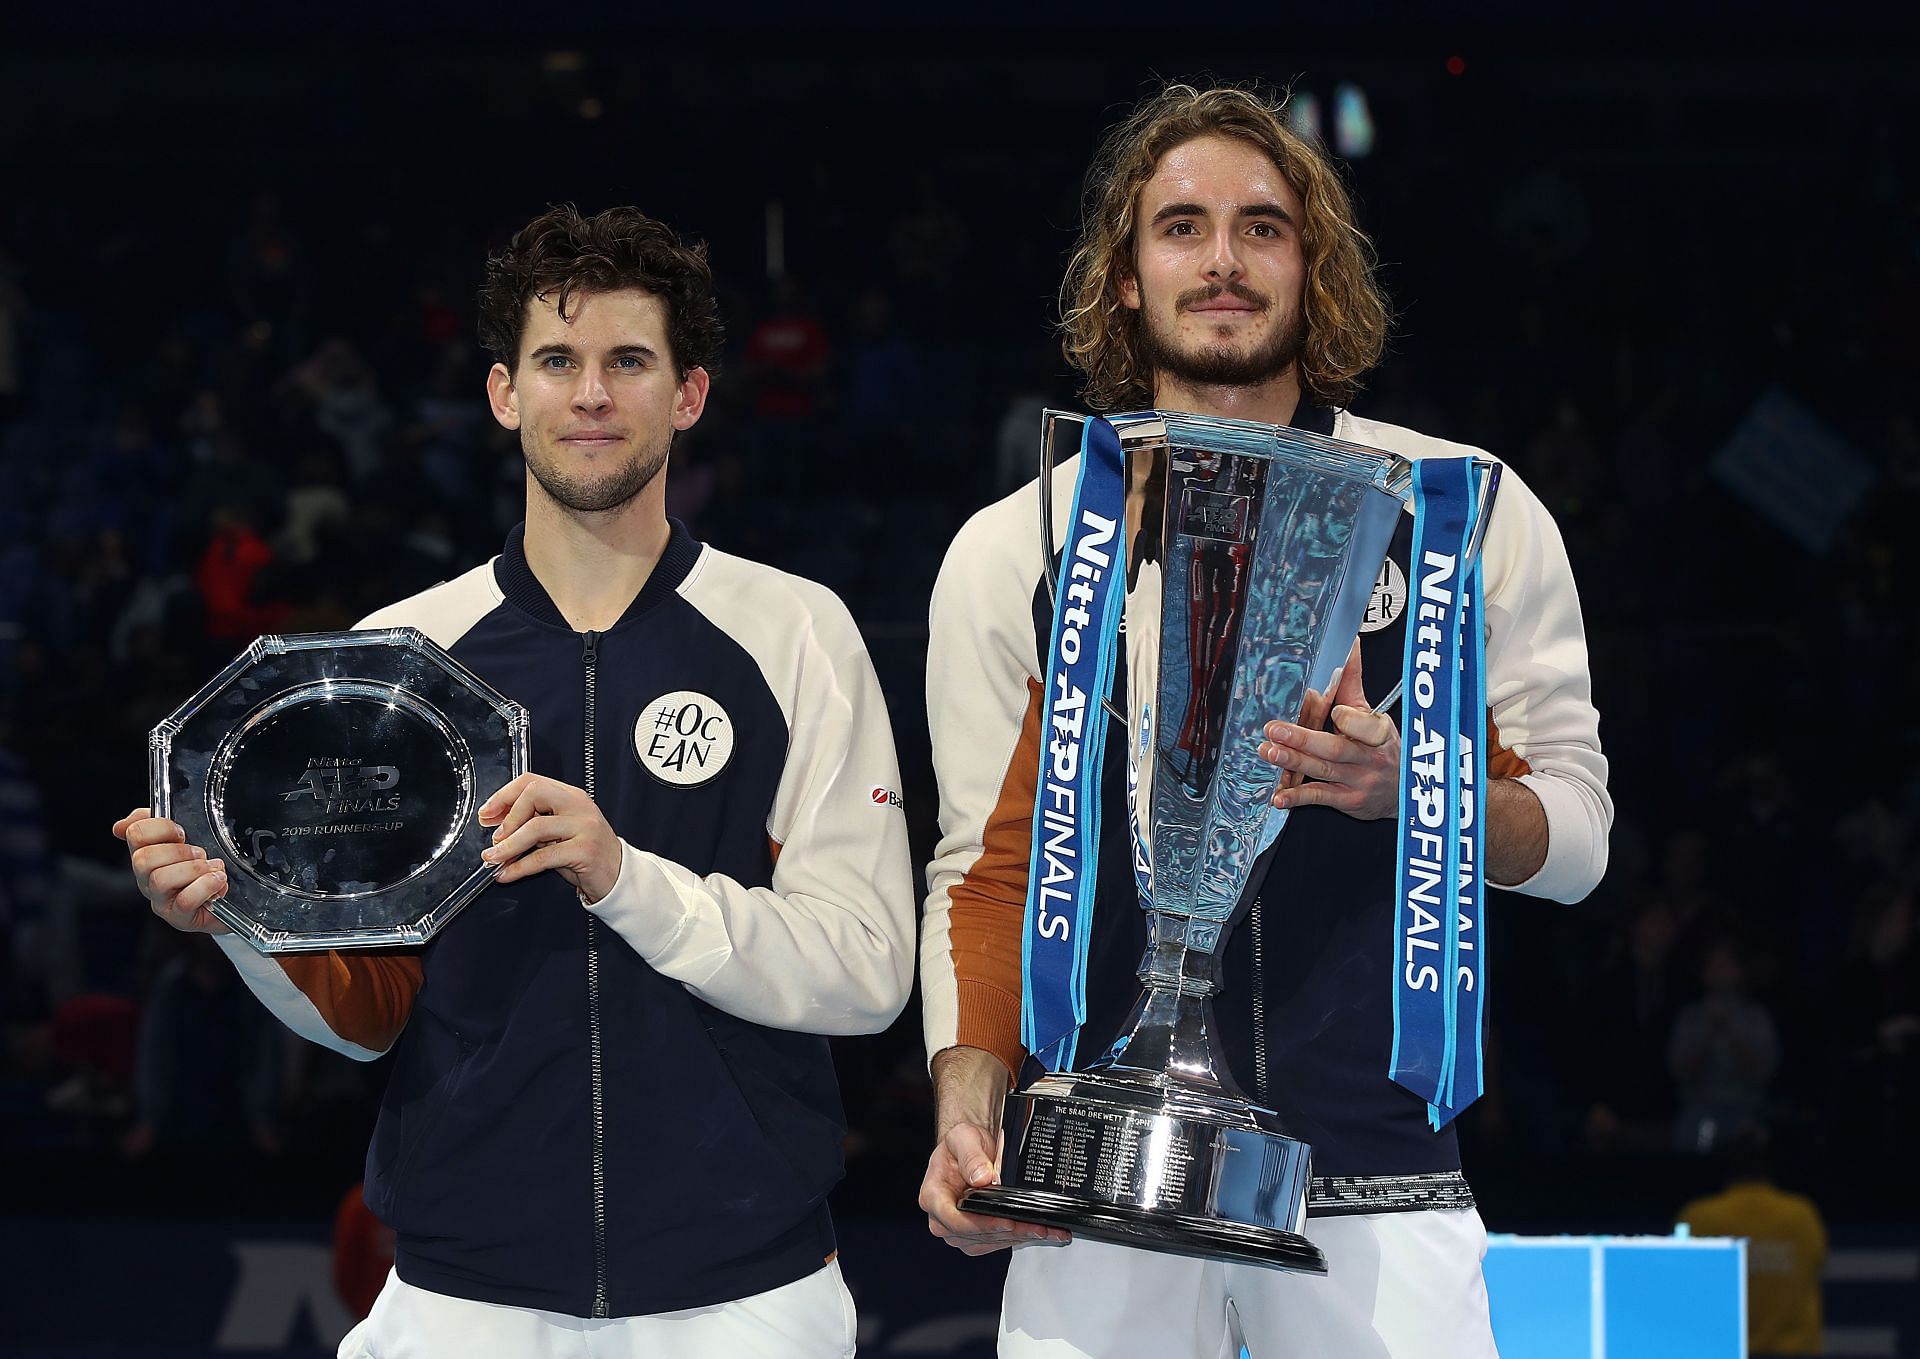 Stefanos Tsitsipas defeated Dominic Thiem at the 2019 ATP Finals